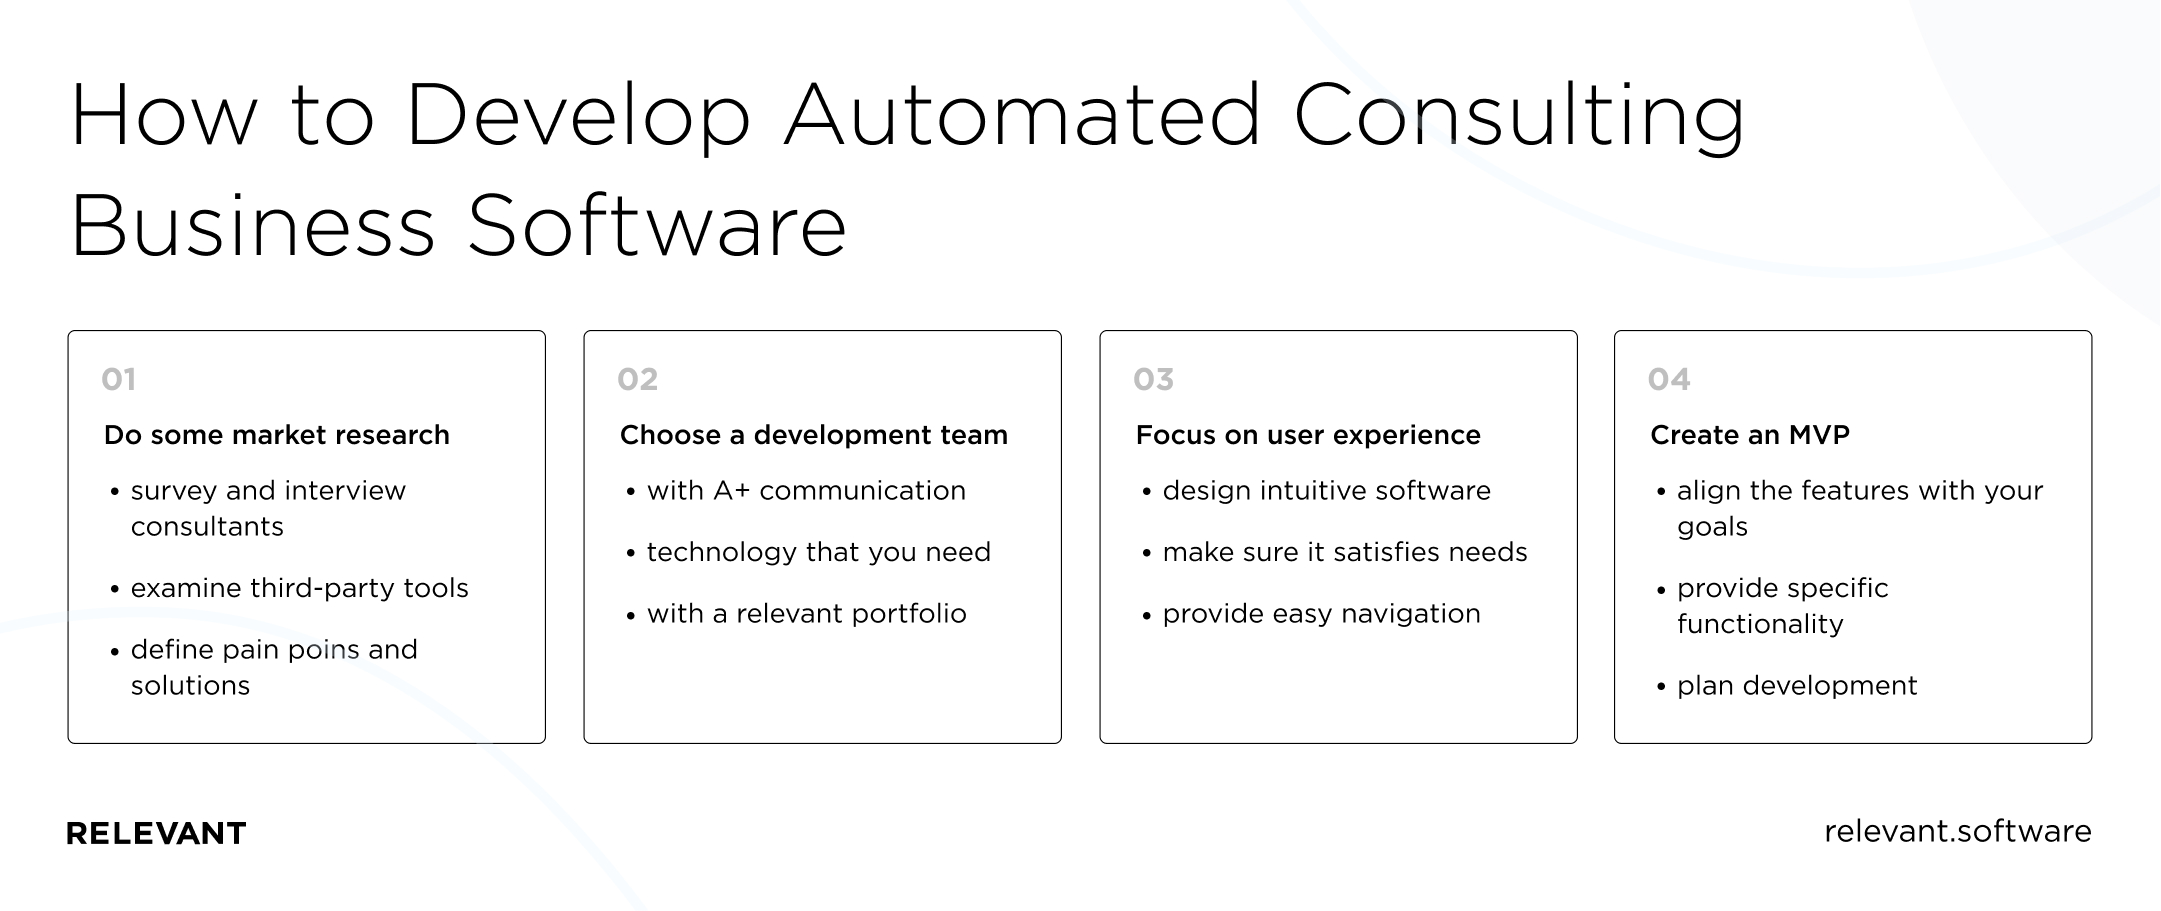 how to develop automated consulting business software